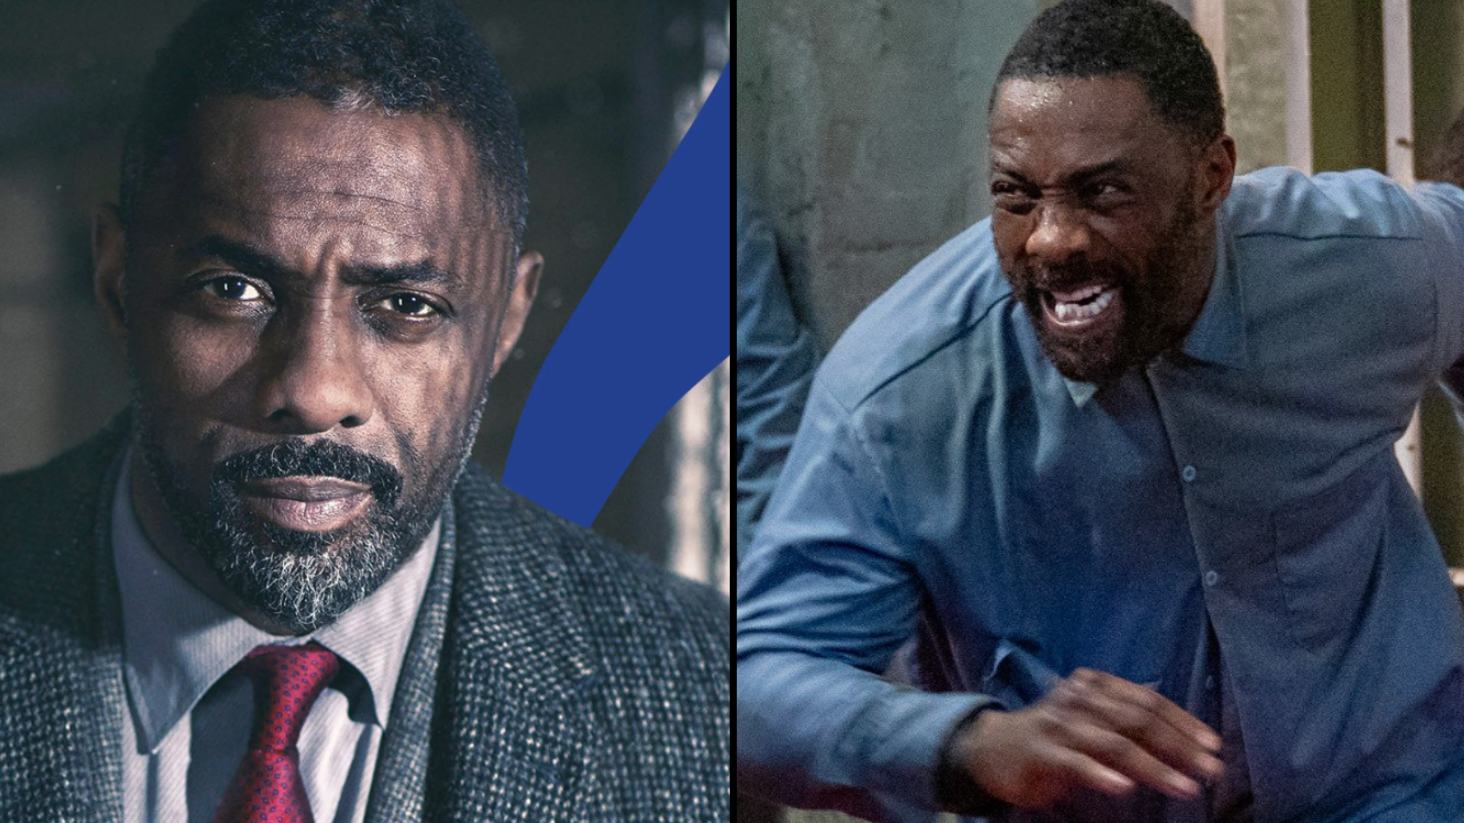 That Creepy Face In Luther: The Fallen Sun Explained - IMDb